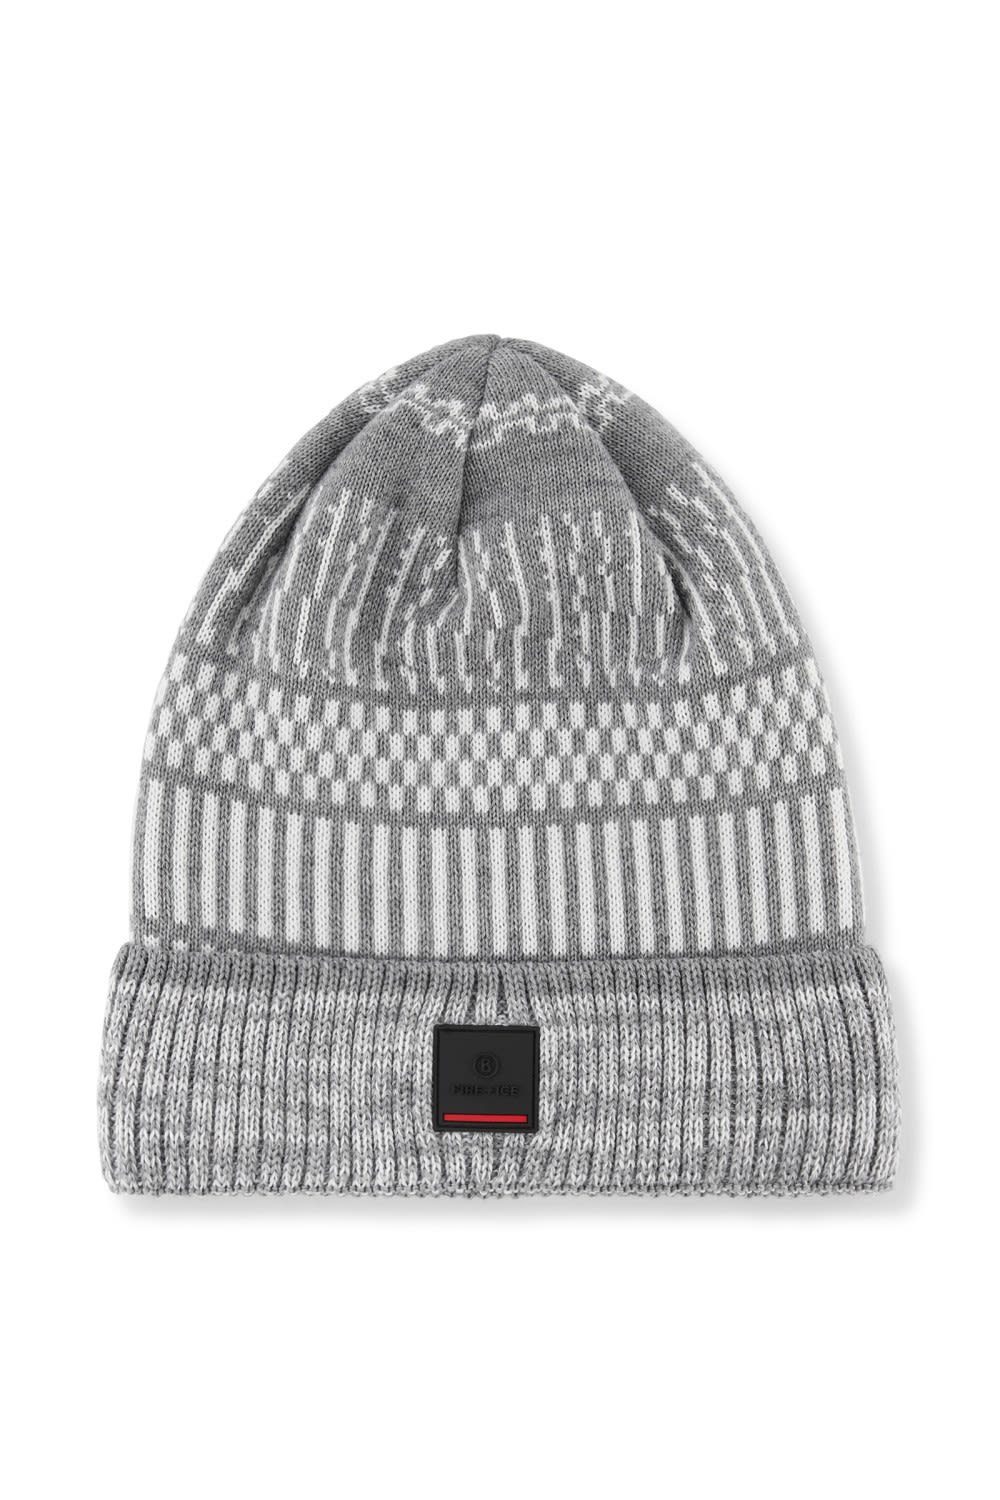 Bogner Fire + Ice Middle + Ladies Bogner Damen Daryl Beanie Fire Ice Accessoires Grey